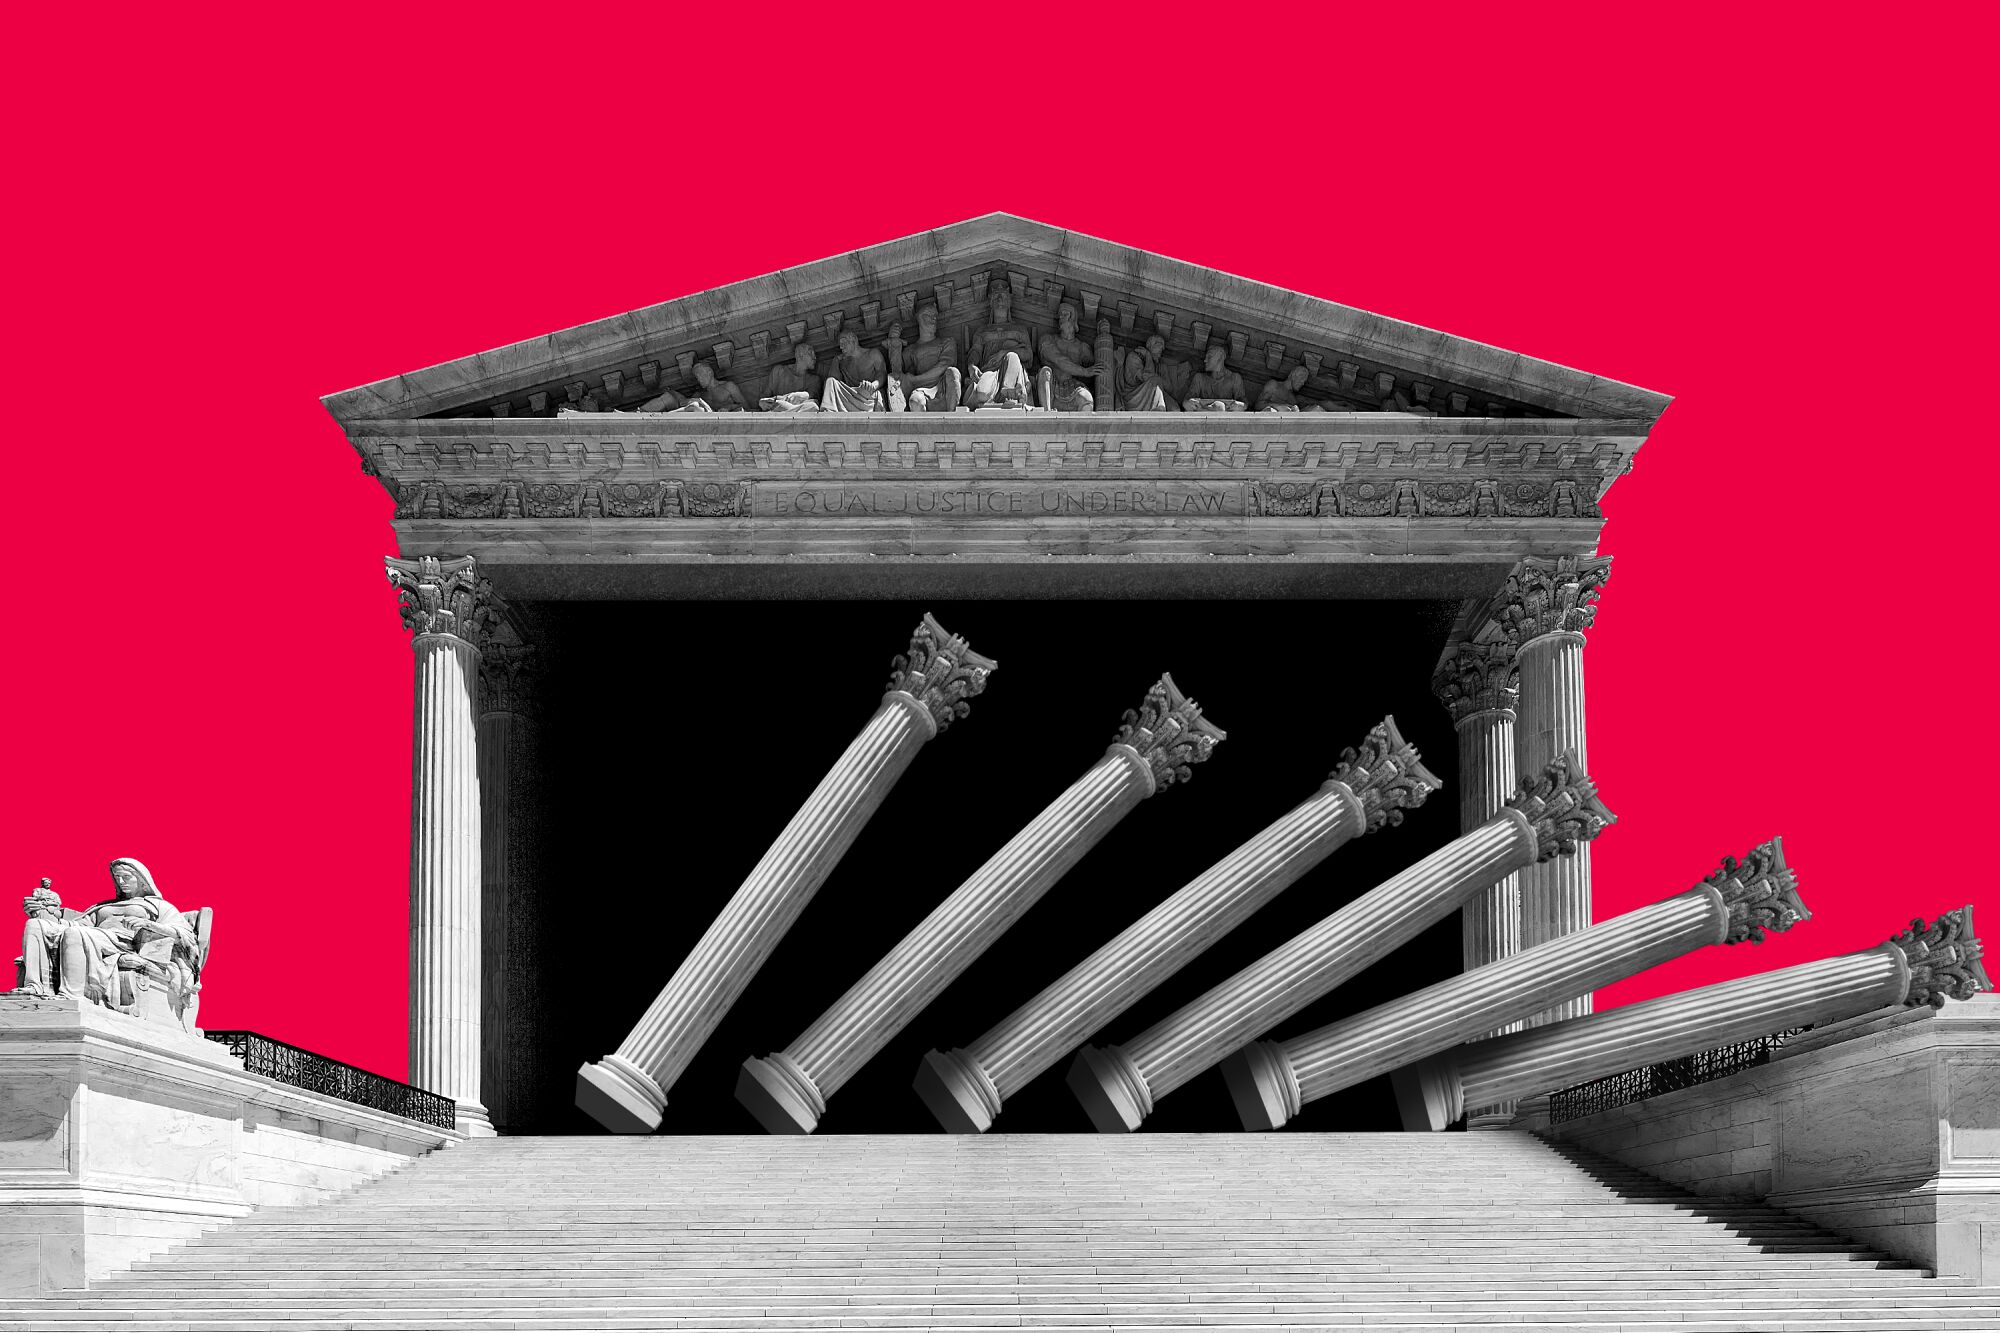 photo illustration of the Supreme Court building with the columns falling like dominoes.